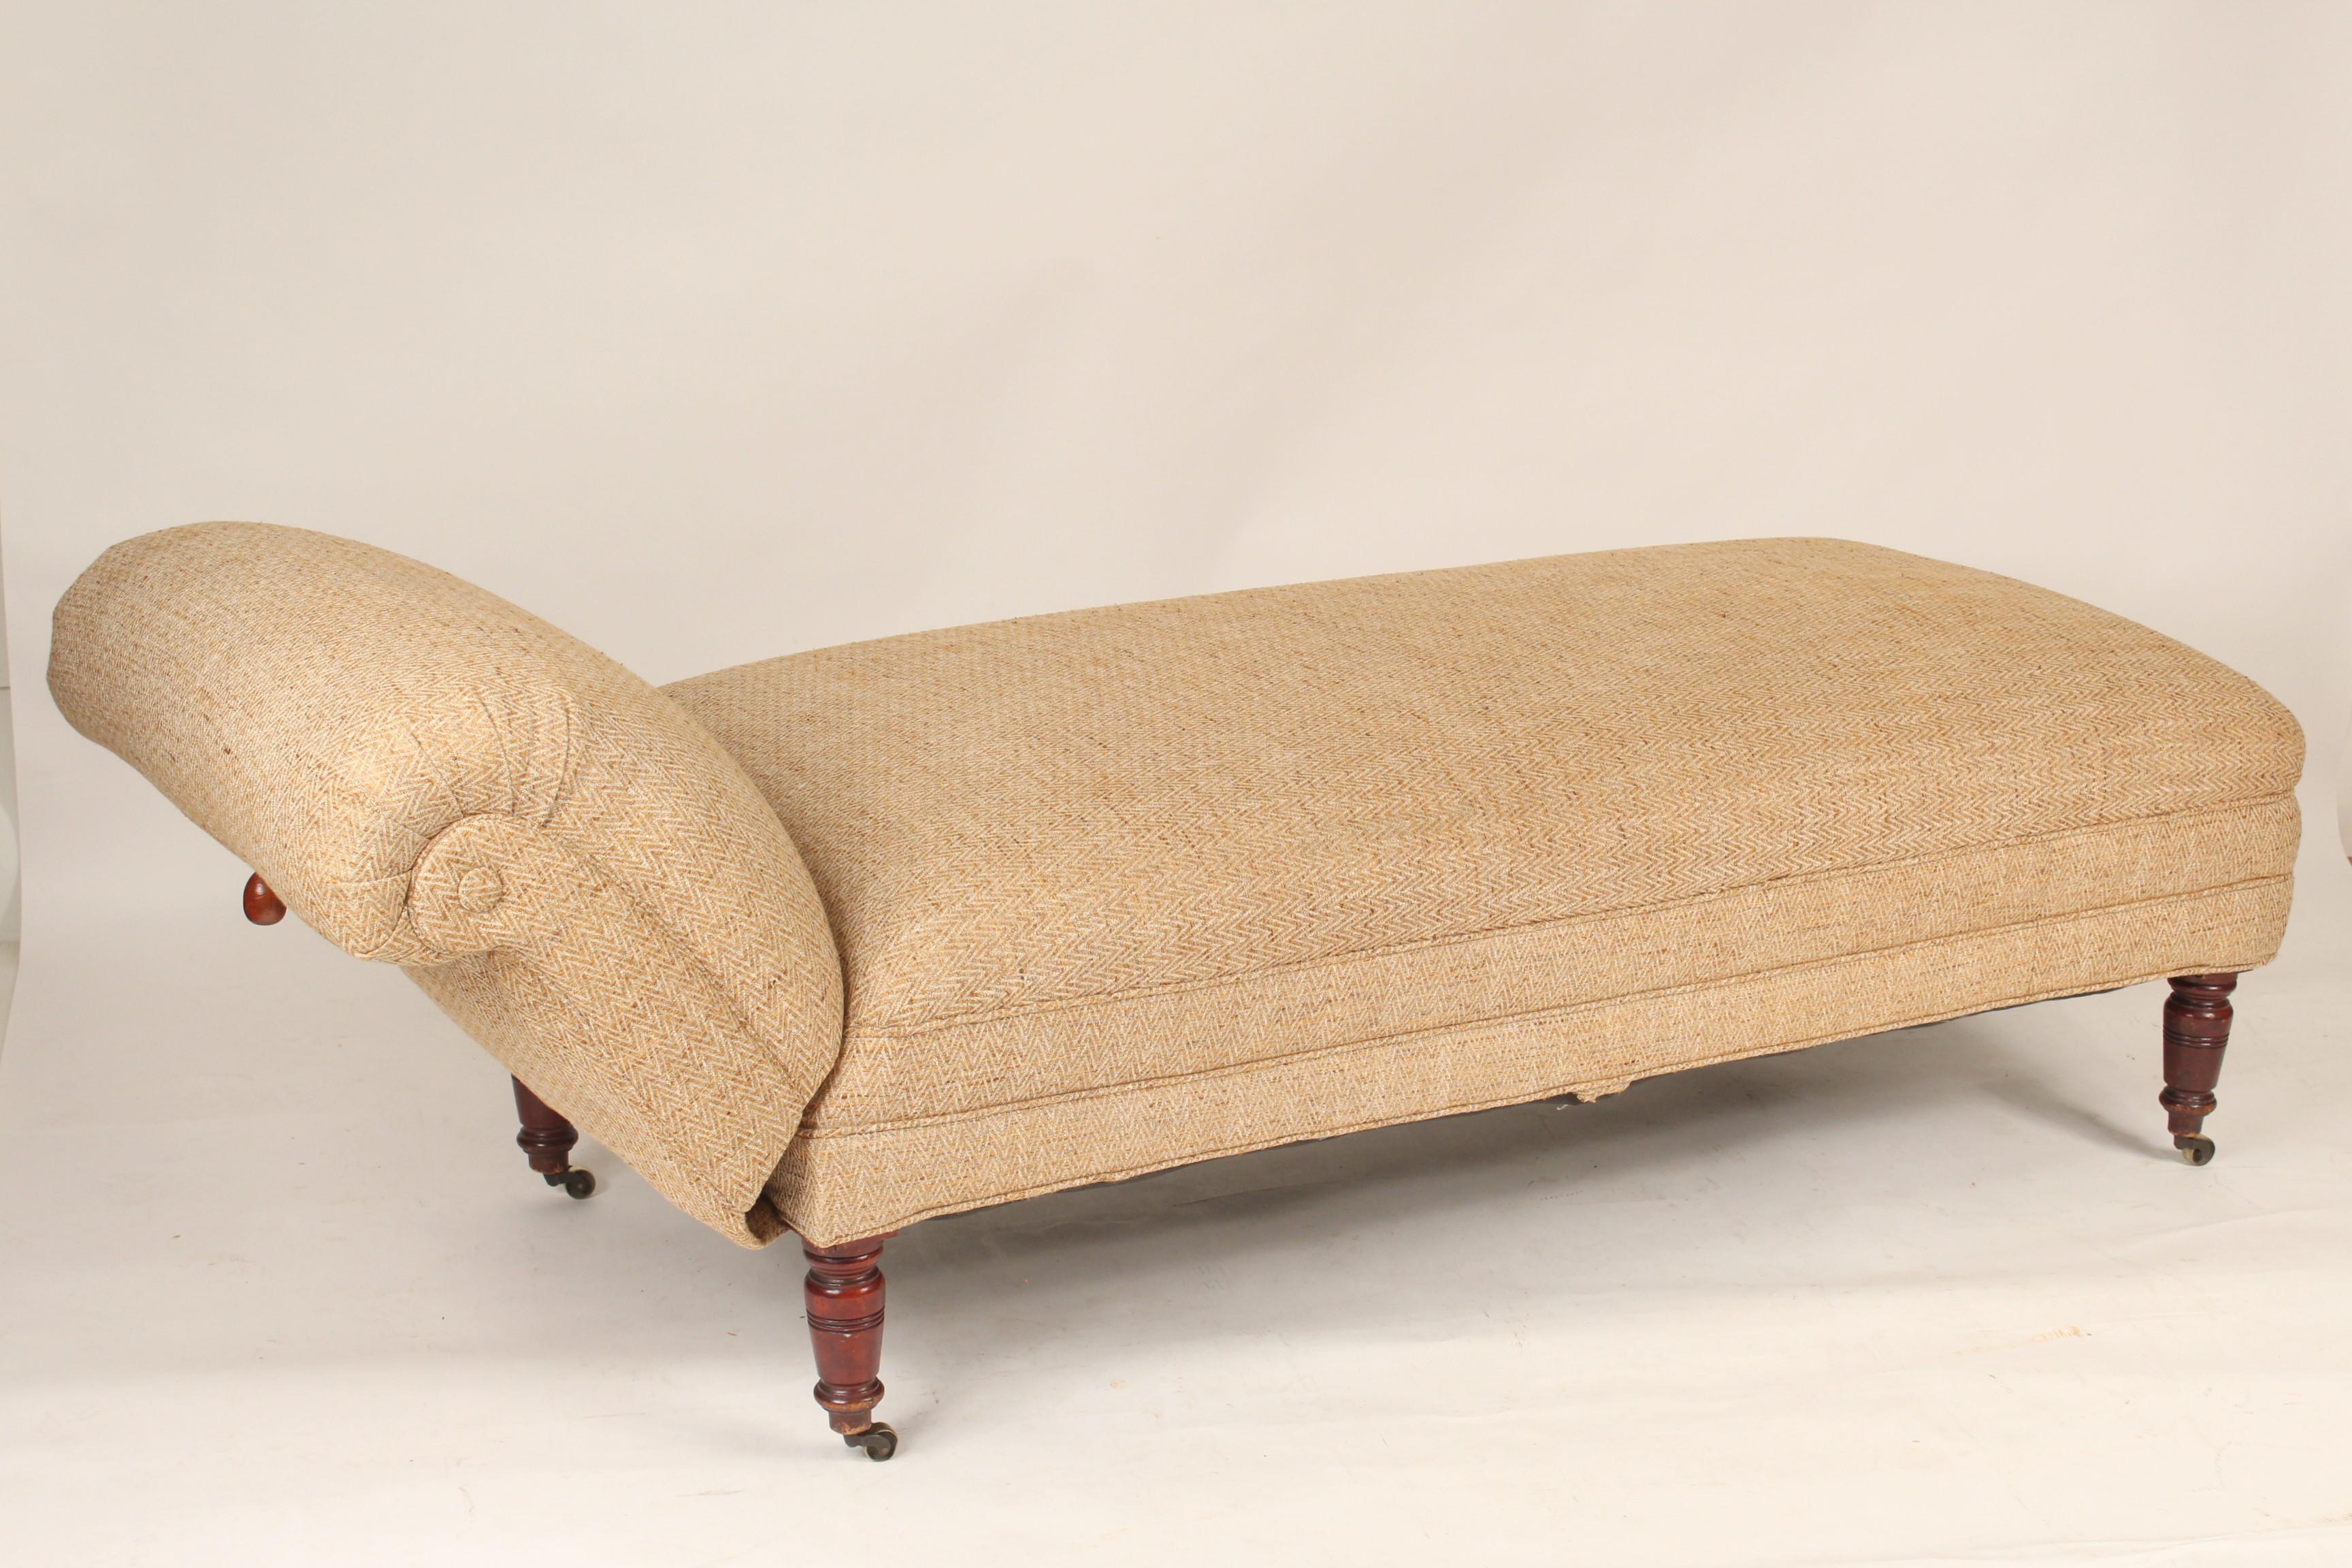 Victorian English Chaise Lounge with Adjustable Back